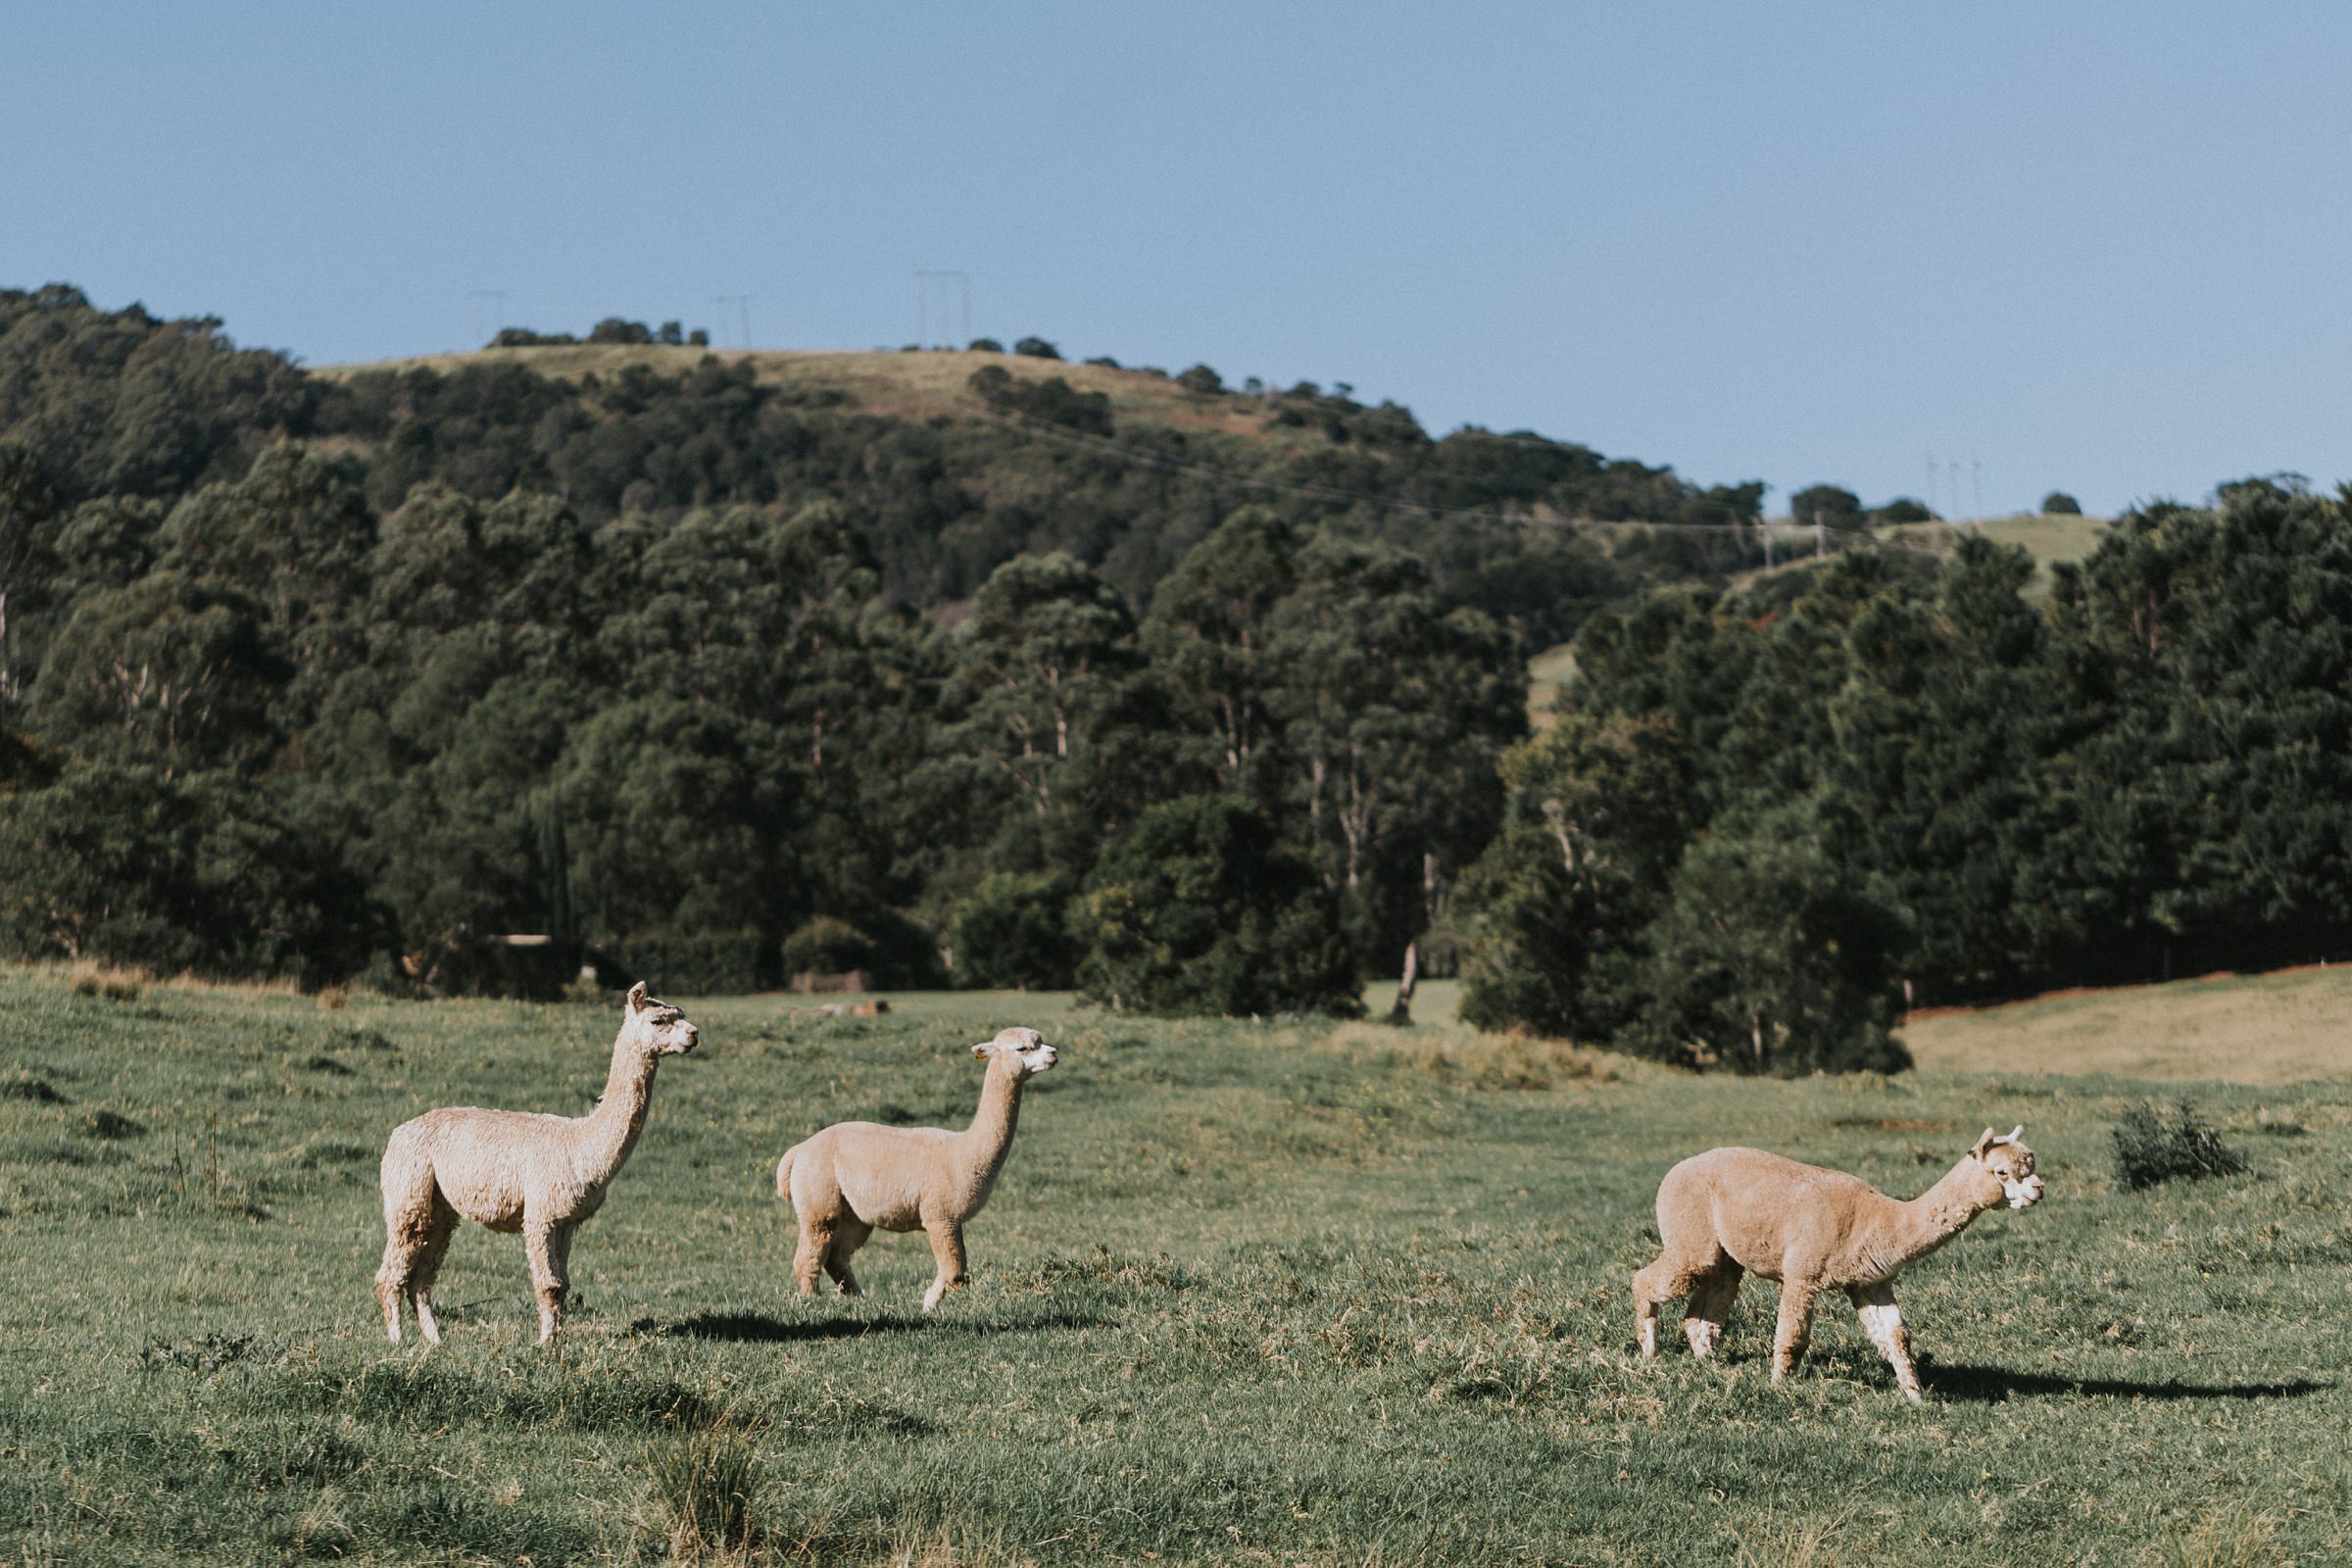 llamas in the field beside the wedding ceremony watching on